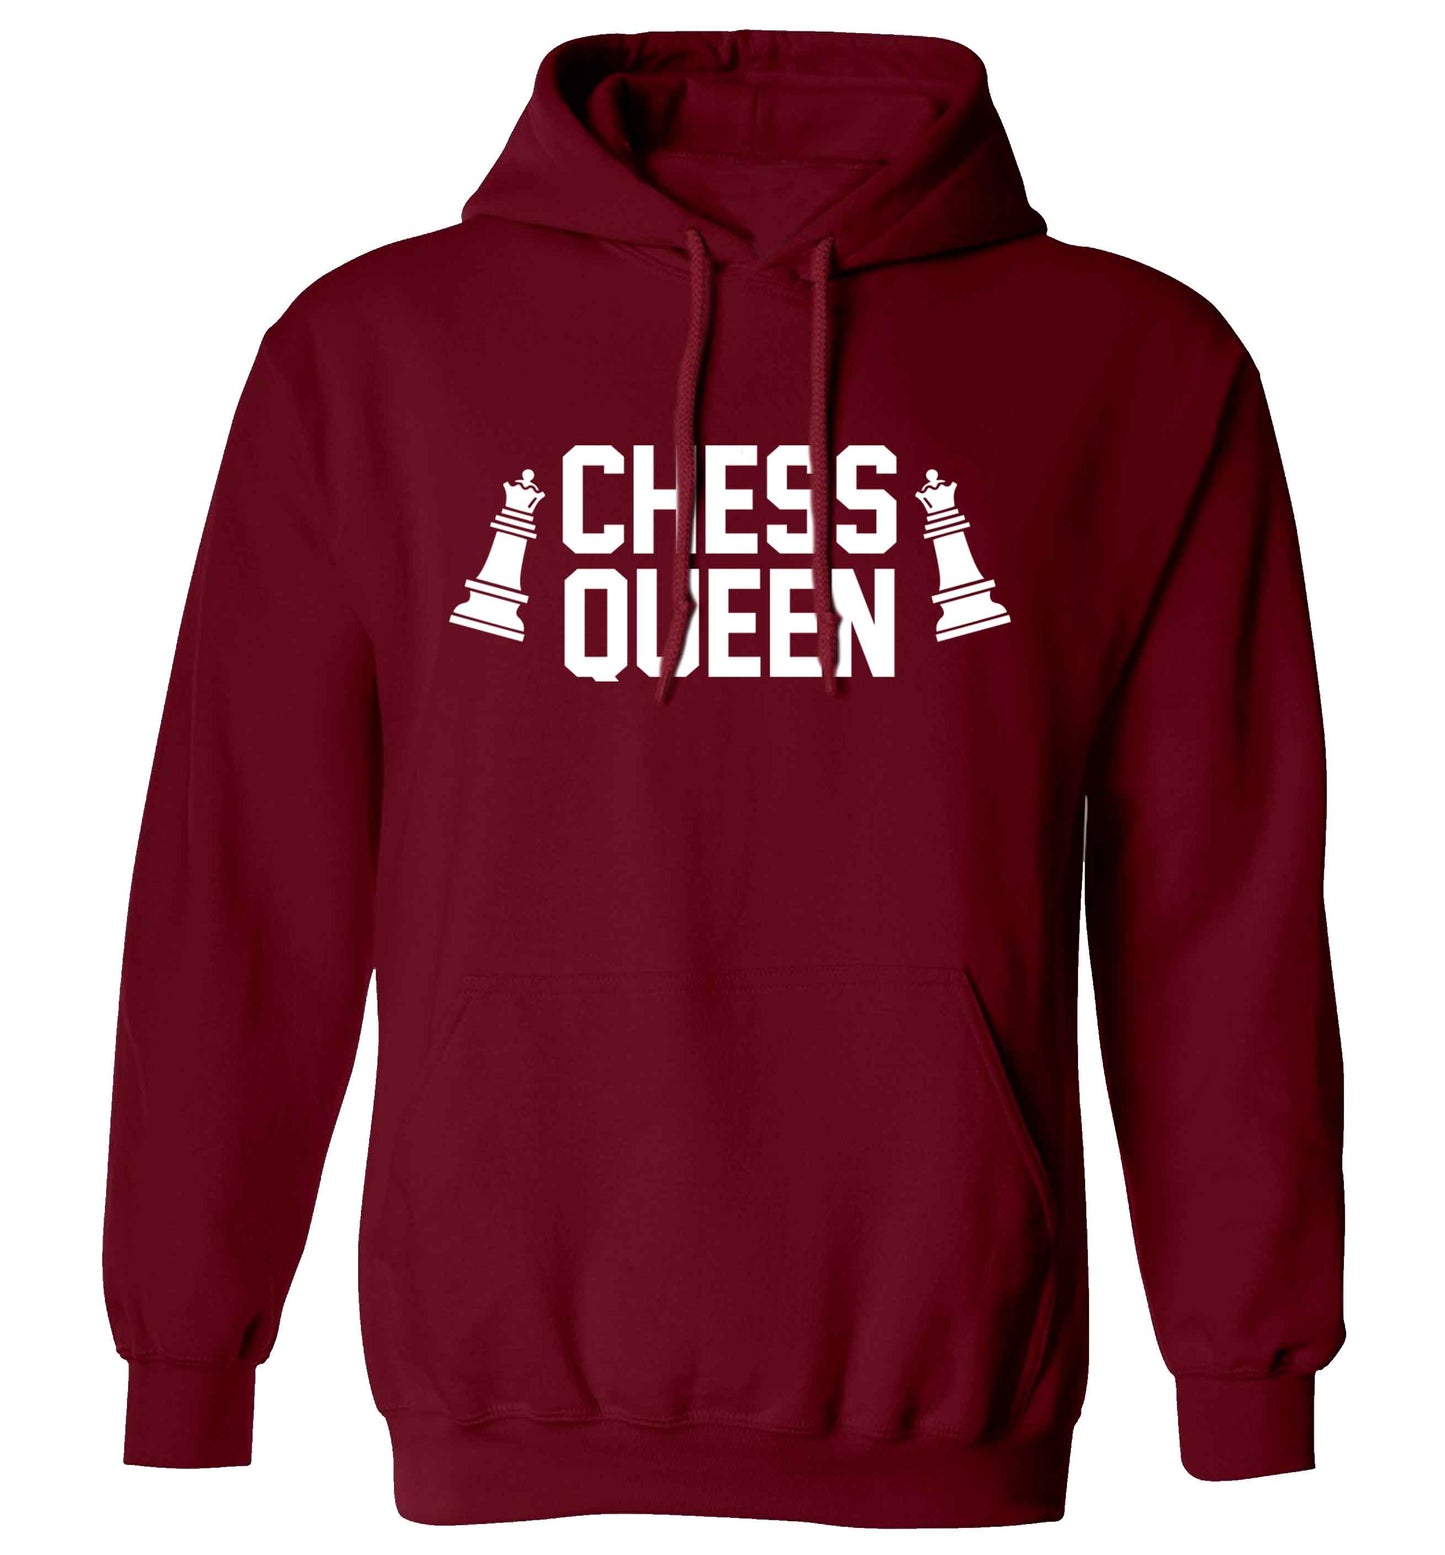 Chess queen adults unisex maroon hoodie 2XL